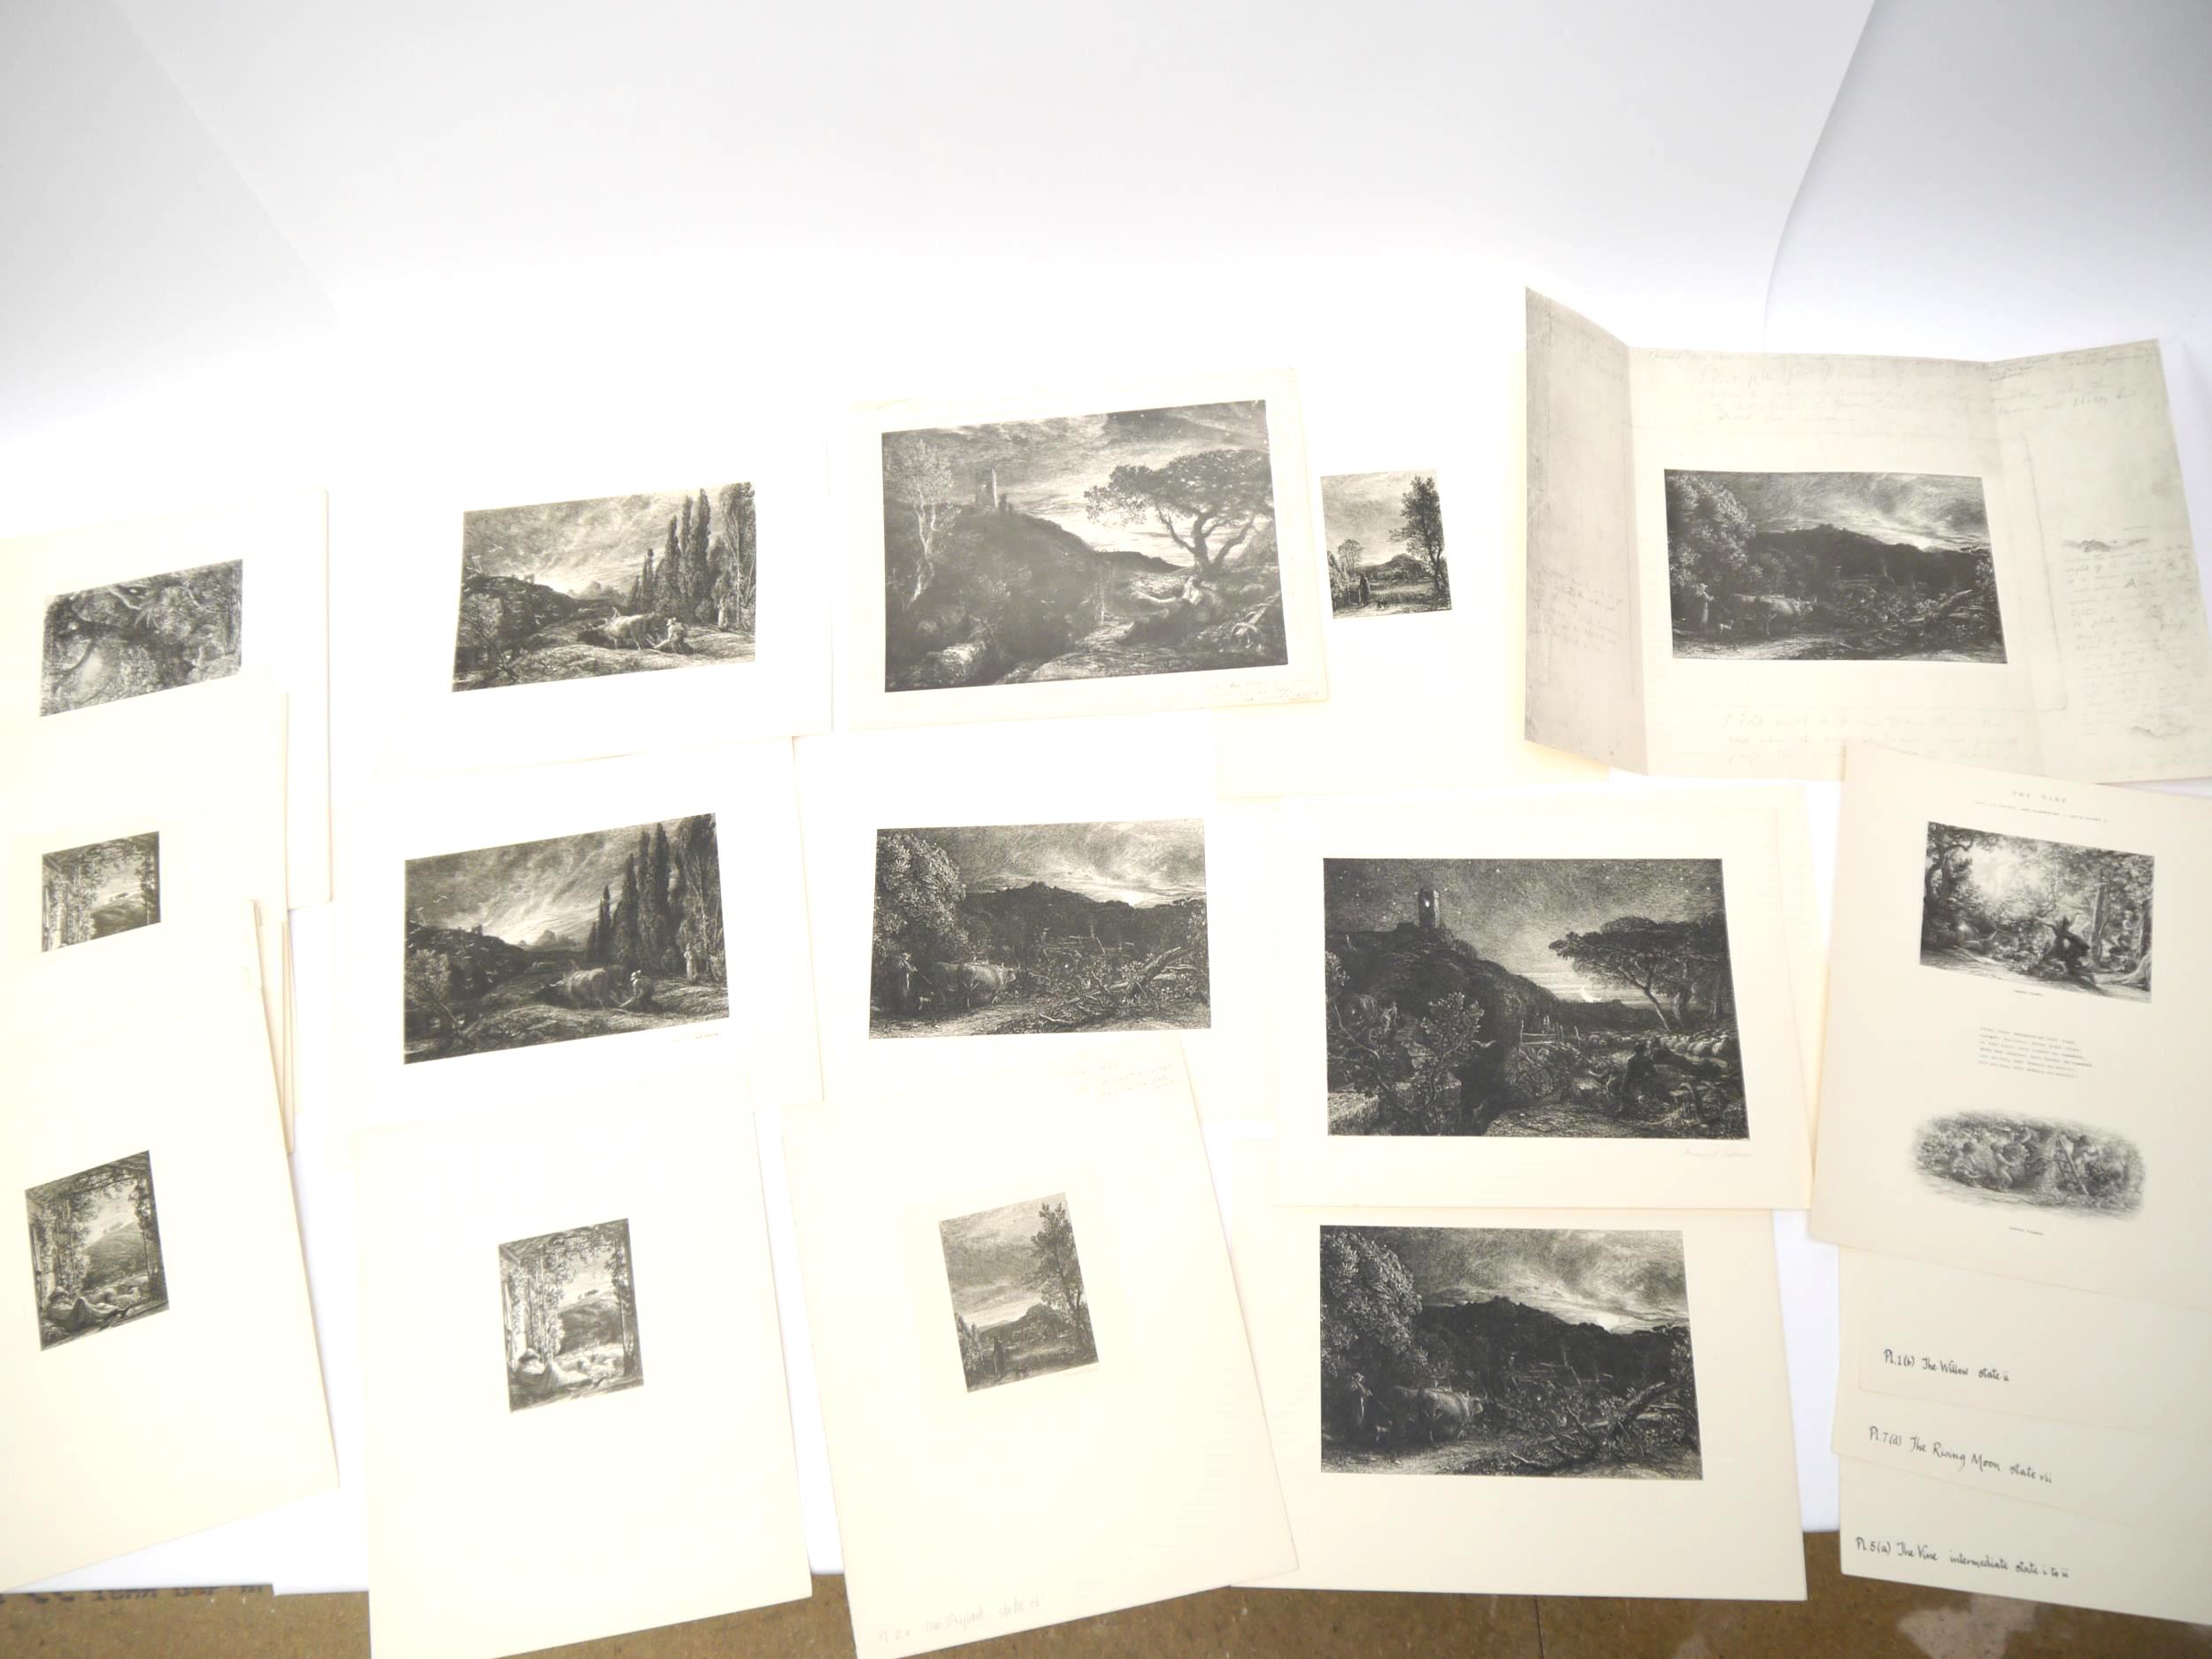 A box of proof plates of facsimile etchings by Samuel Palmer, published by the Trianon Press,